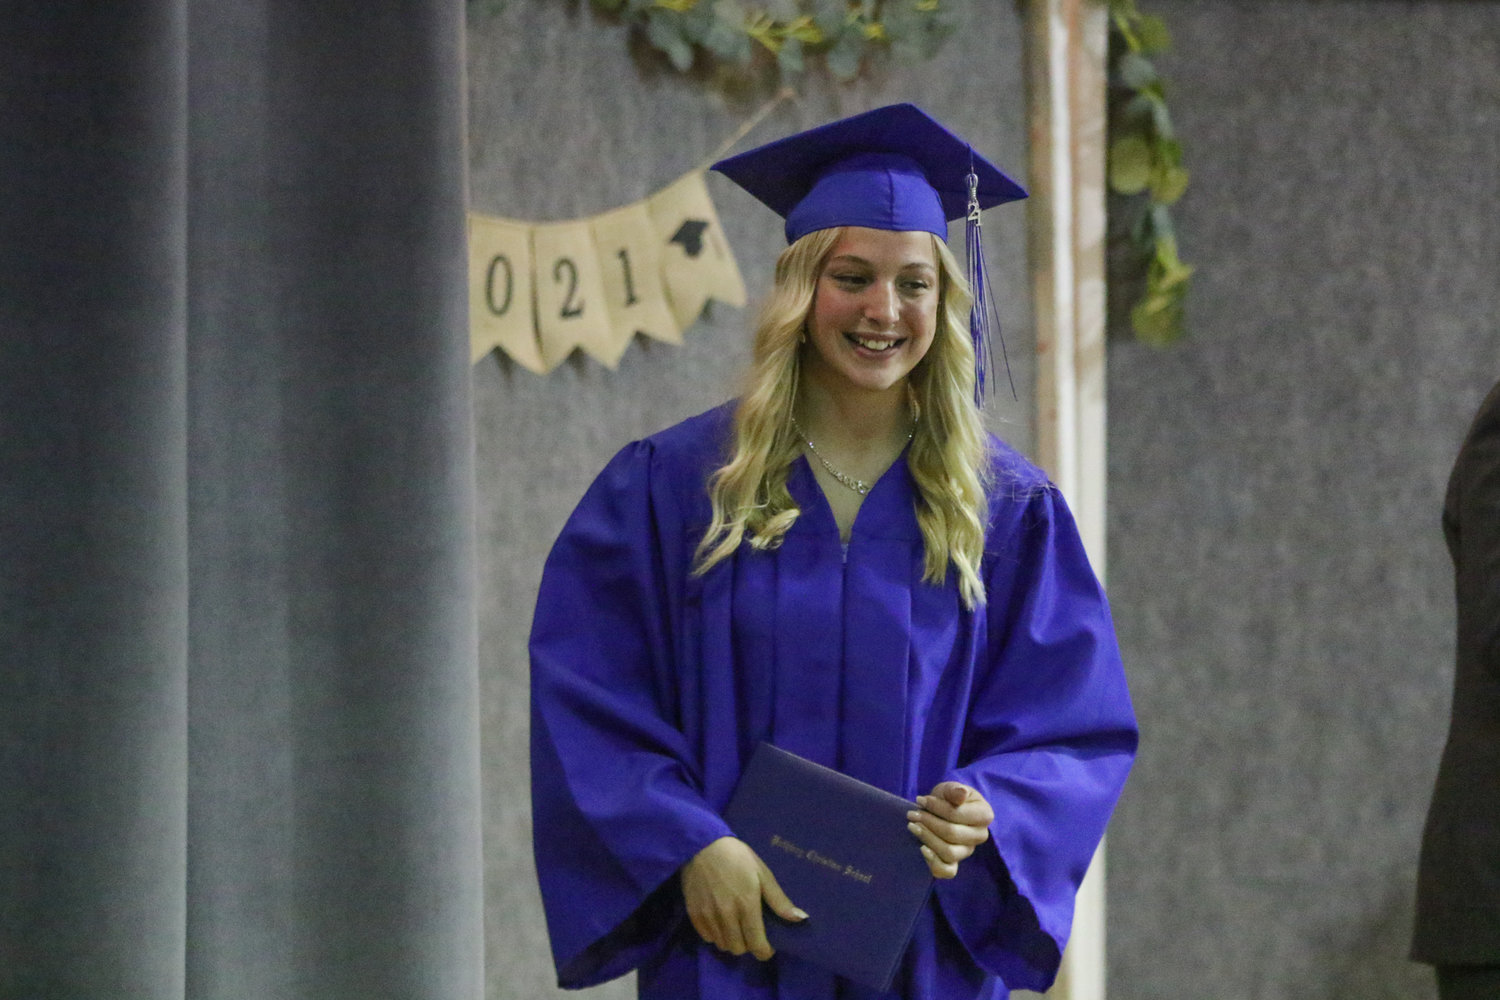 Mariah Miller walks across the stage with her diploma during Pathway Christian School's graduation ceremony on May 16, 2021.